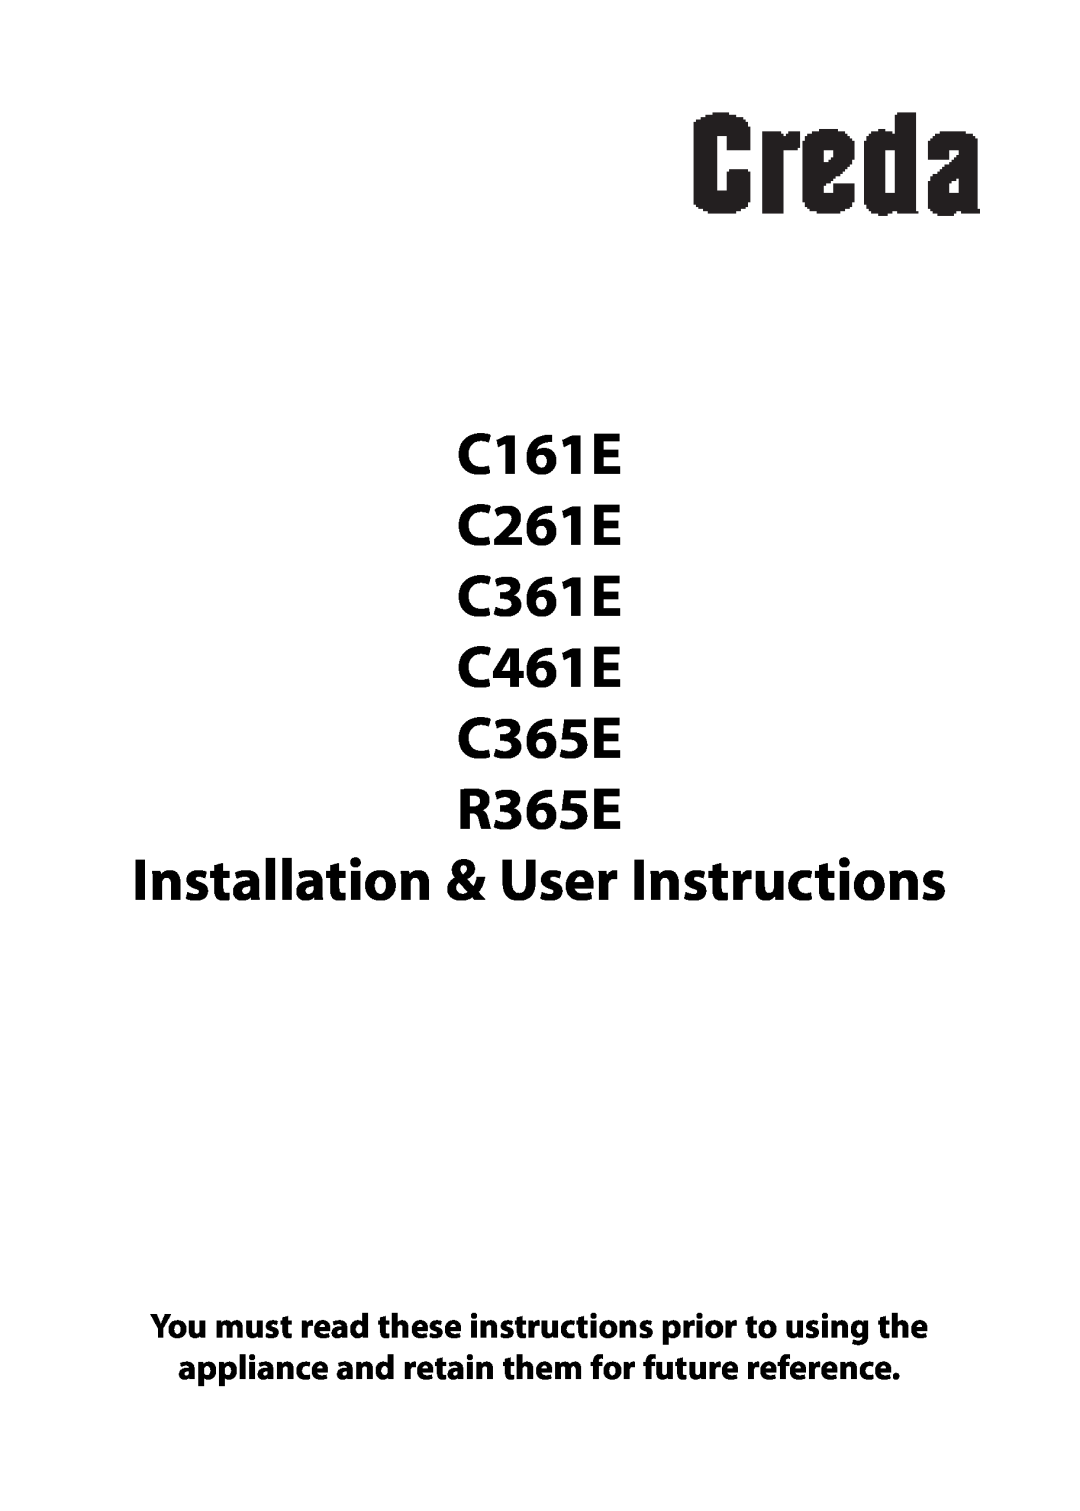 Creda manual C161E C261E C361E C461E C365E R365E Installation & User Instructions 